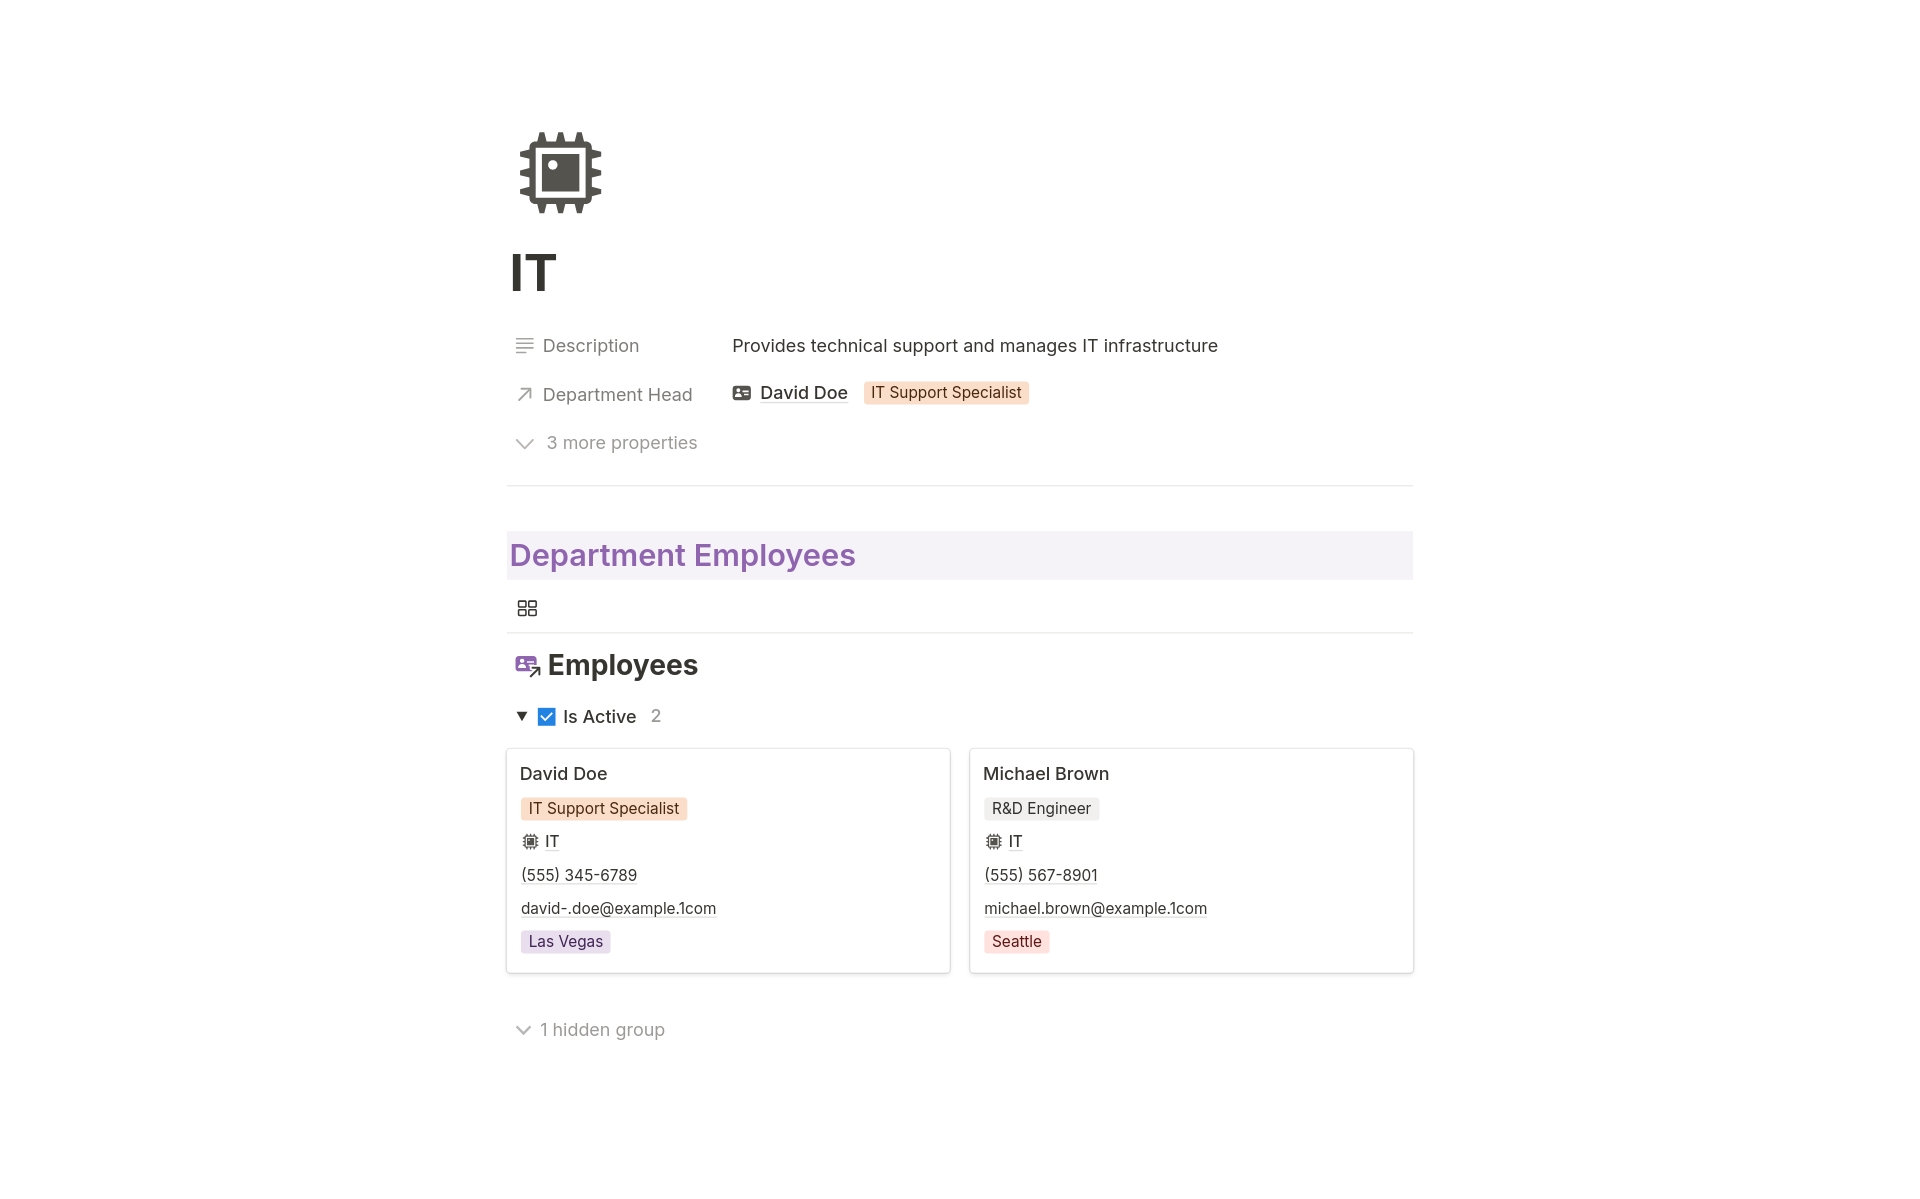 Keep track of your employees' details and contact information with this Notion template. Easily add and manage details such as personal information, job titles, department affiliations, and contact information. Keep your employee records up-to-date and accessible at all times.